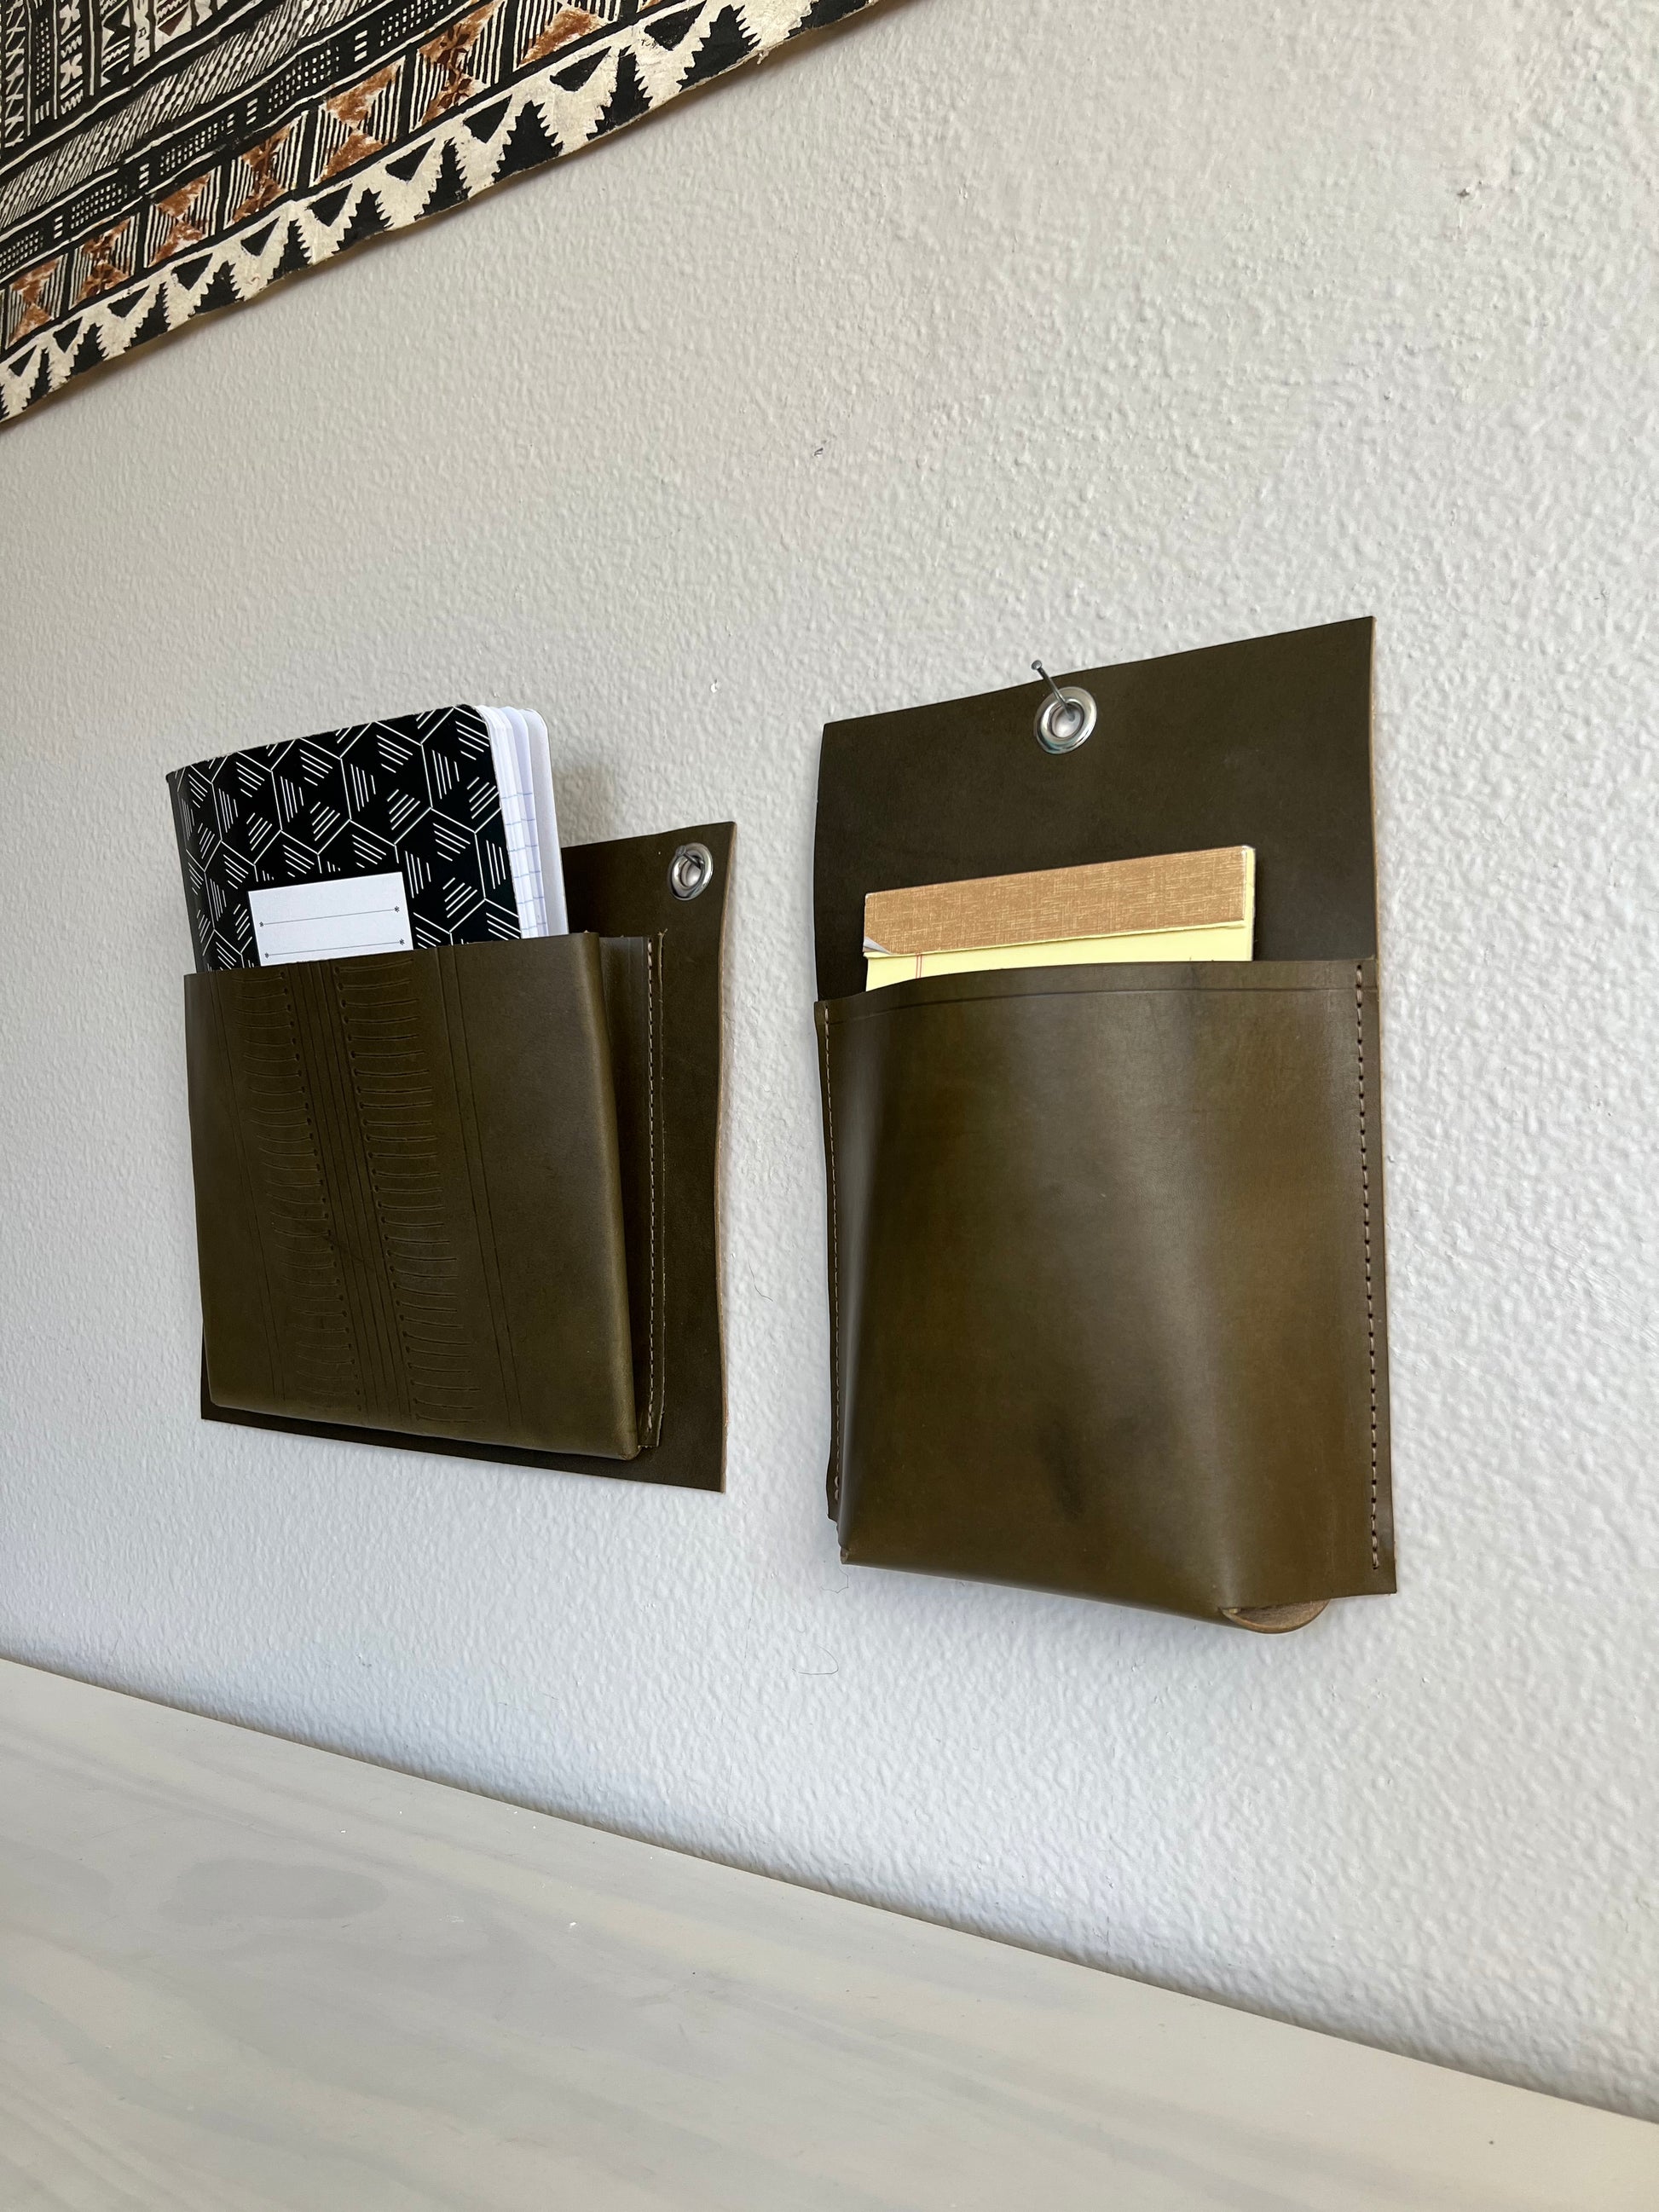 Duo of leather wall pockets holds notebooks in minimal, modern office.